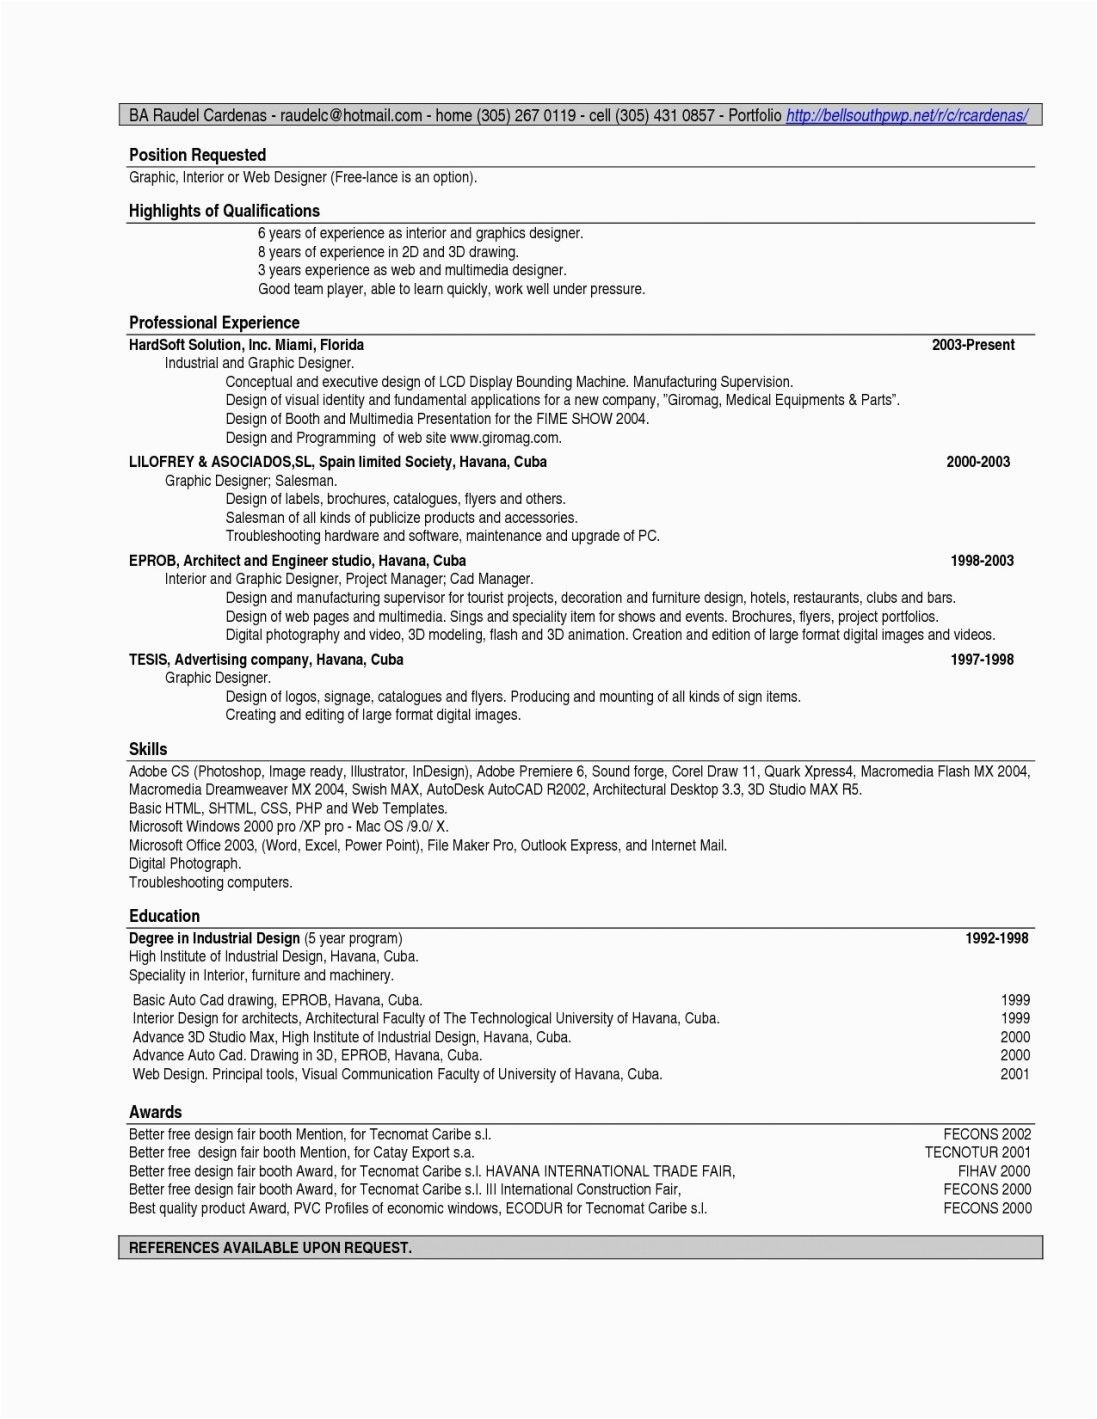 Resume Template References Available Upon Request Resume Examples References Available Upon Request Resume